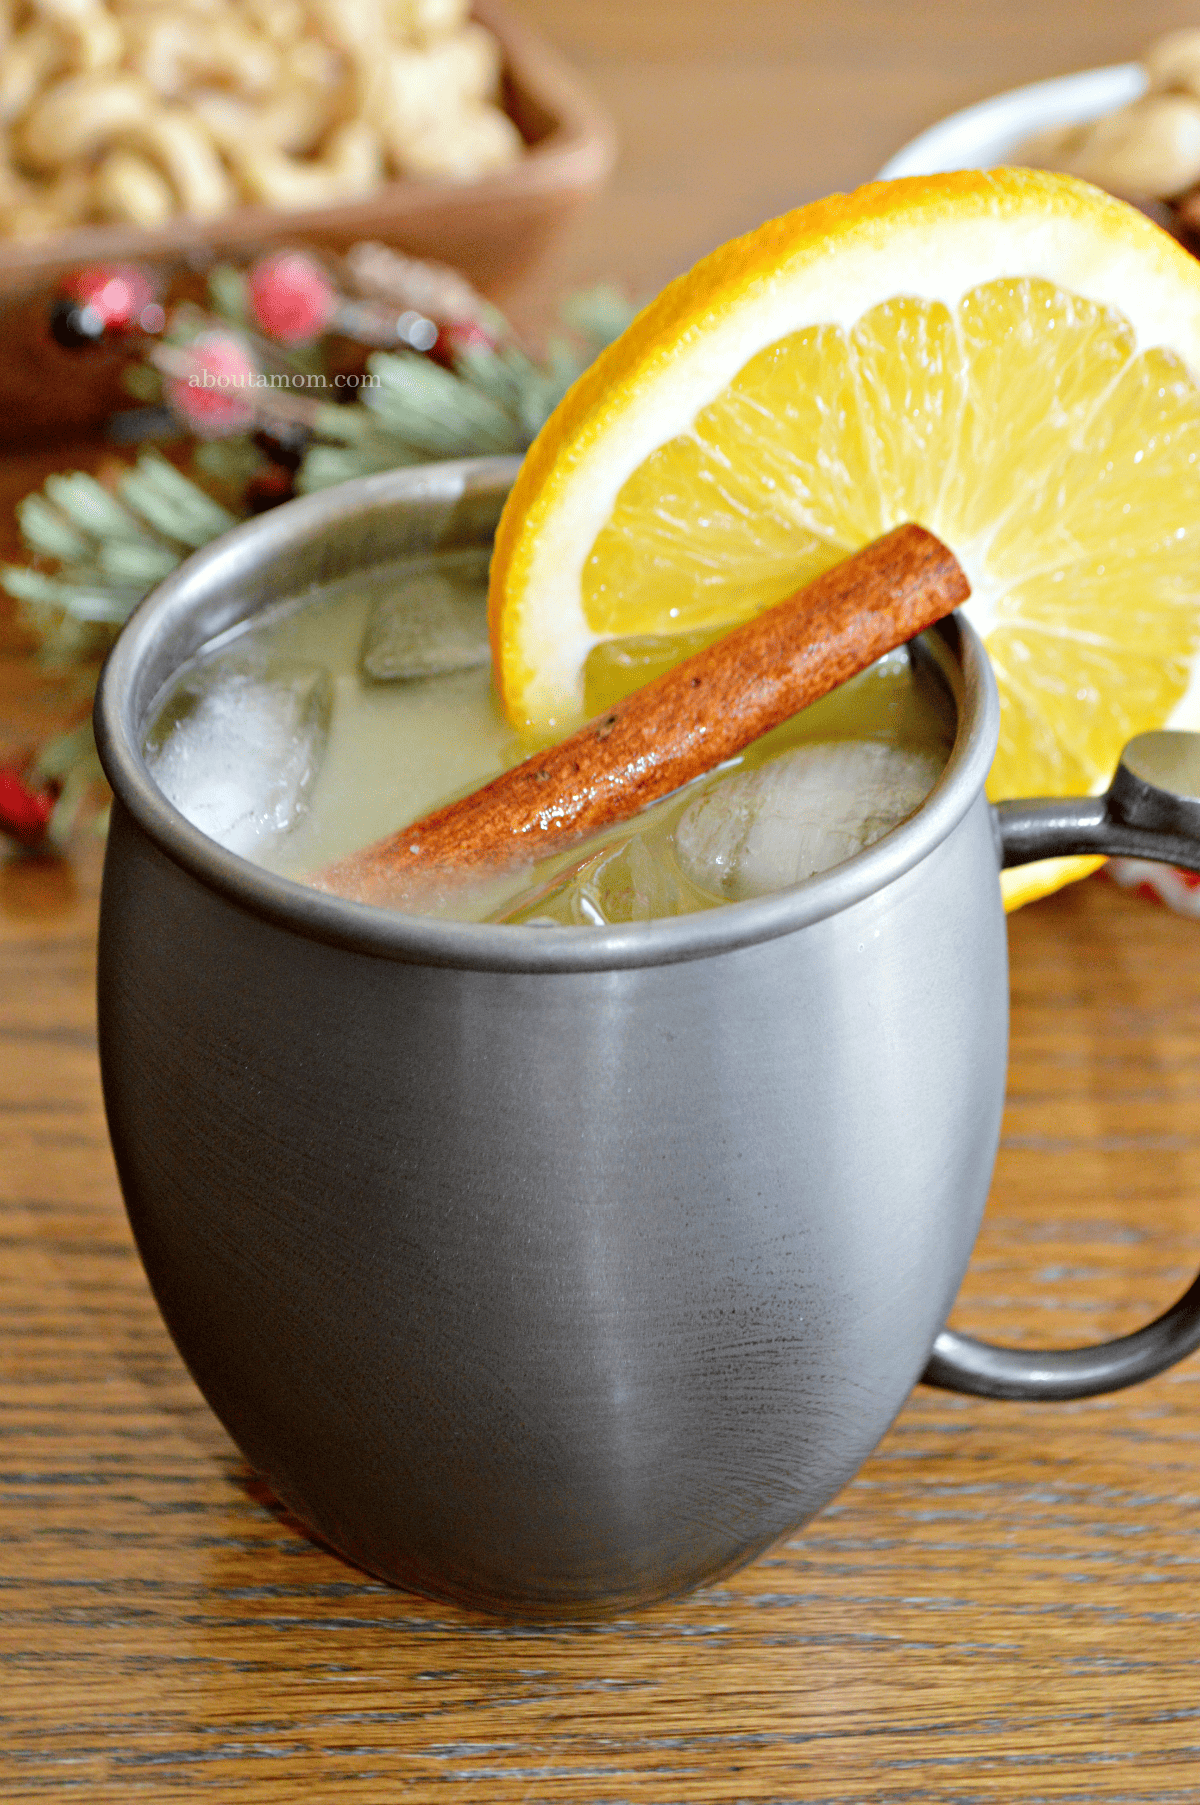 This Spiced Orange Moscow Mule cocktail is the perfect, festive cocktail for your holiday gatherings. The delicious holiday drink comes together easily and is made with orange juice, vodka, ginger beer and a simple syrup spiced with whole cloves and cinnamon sticks.